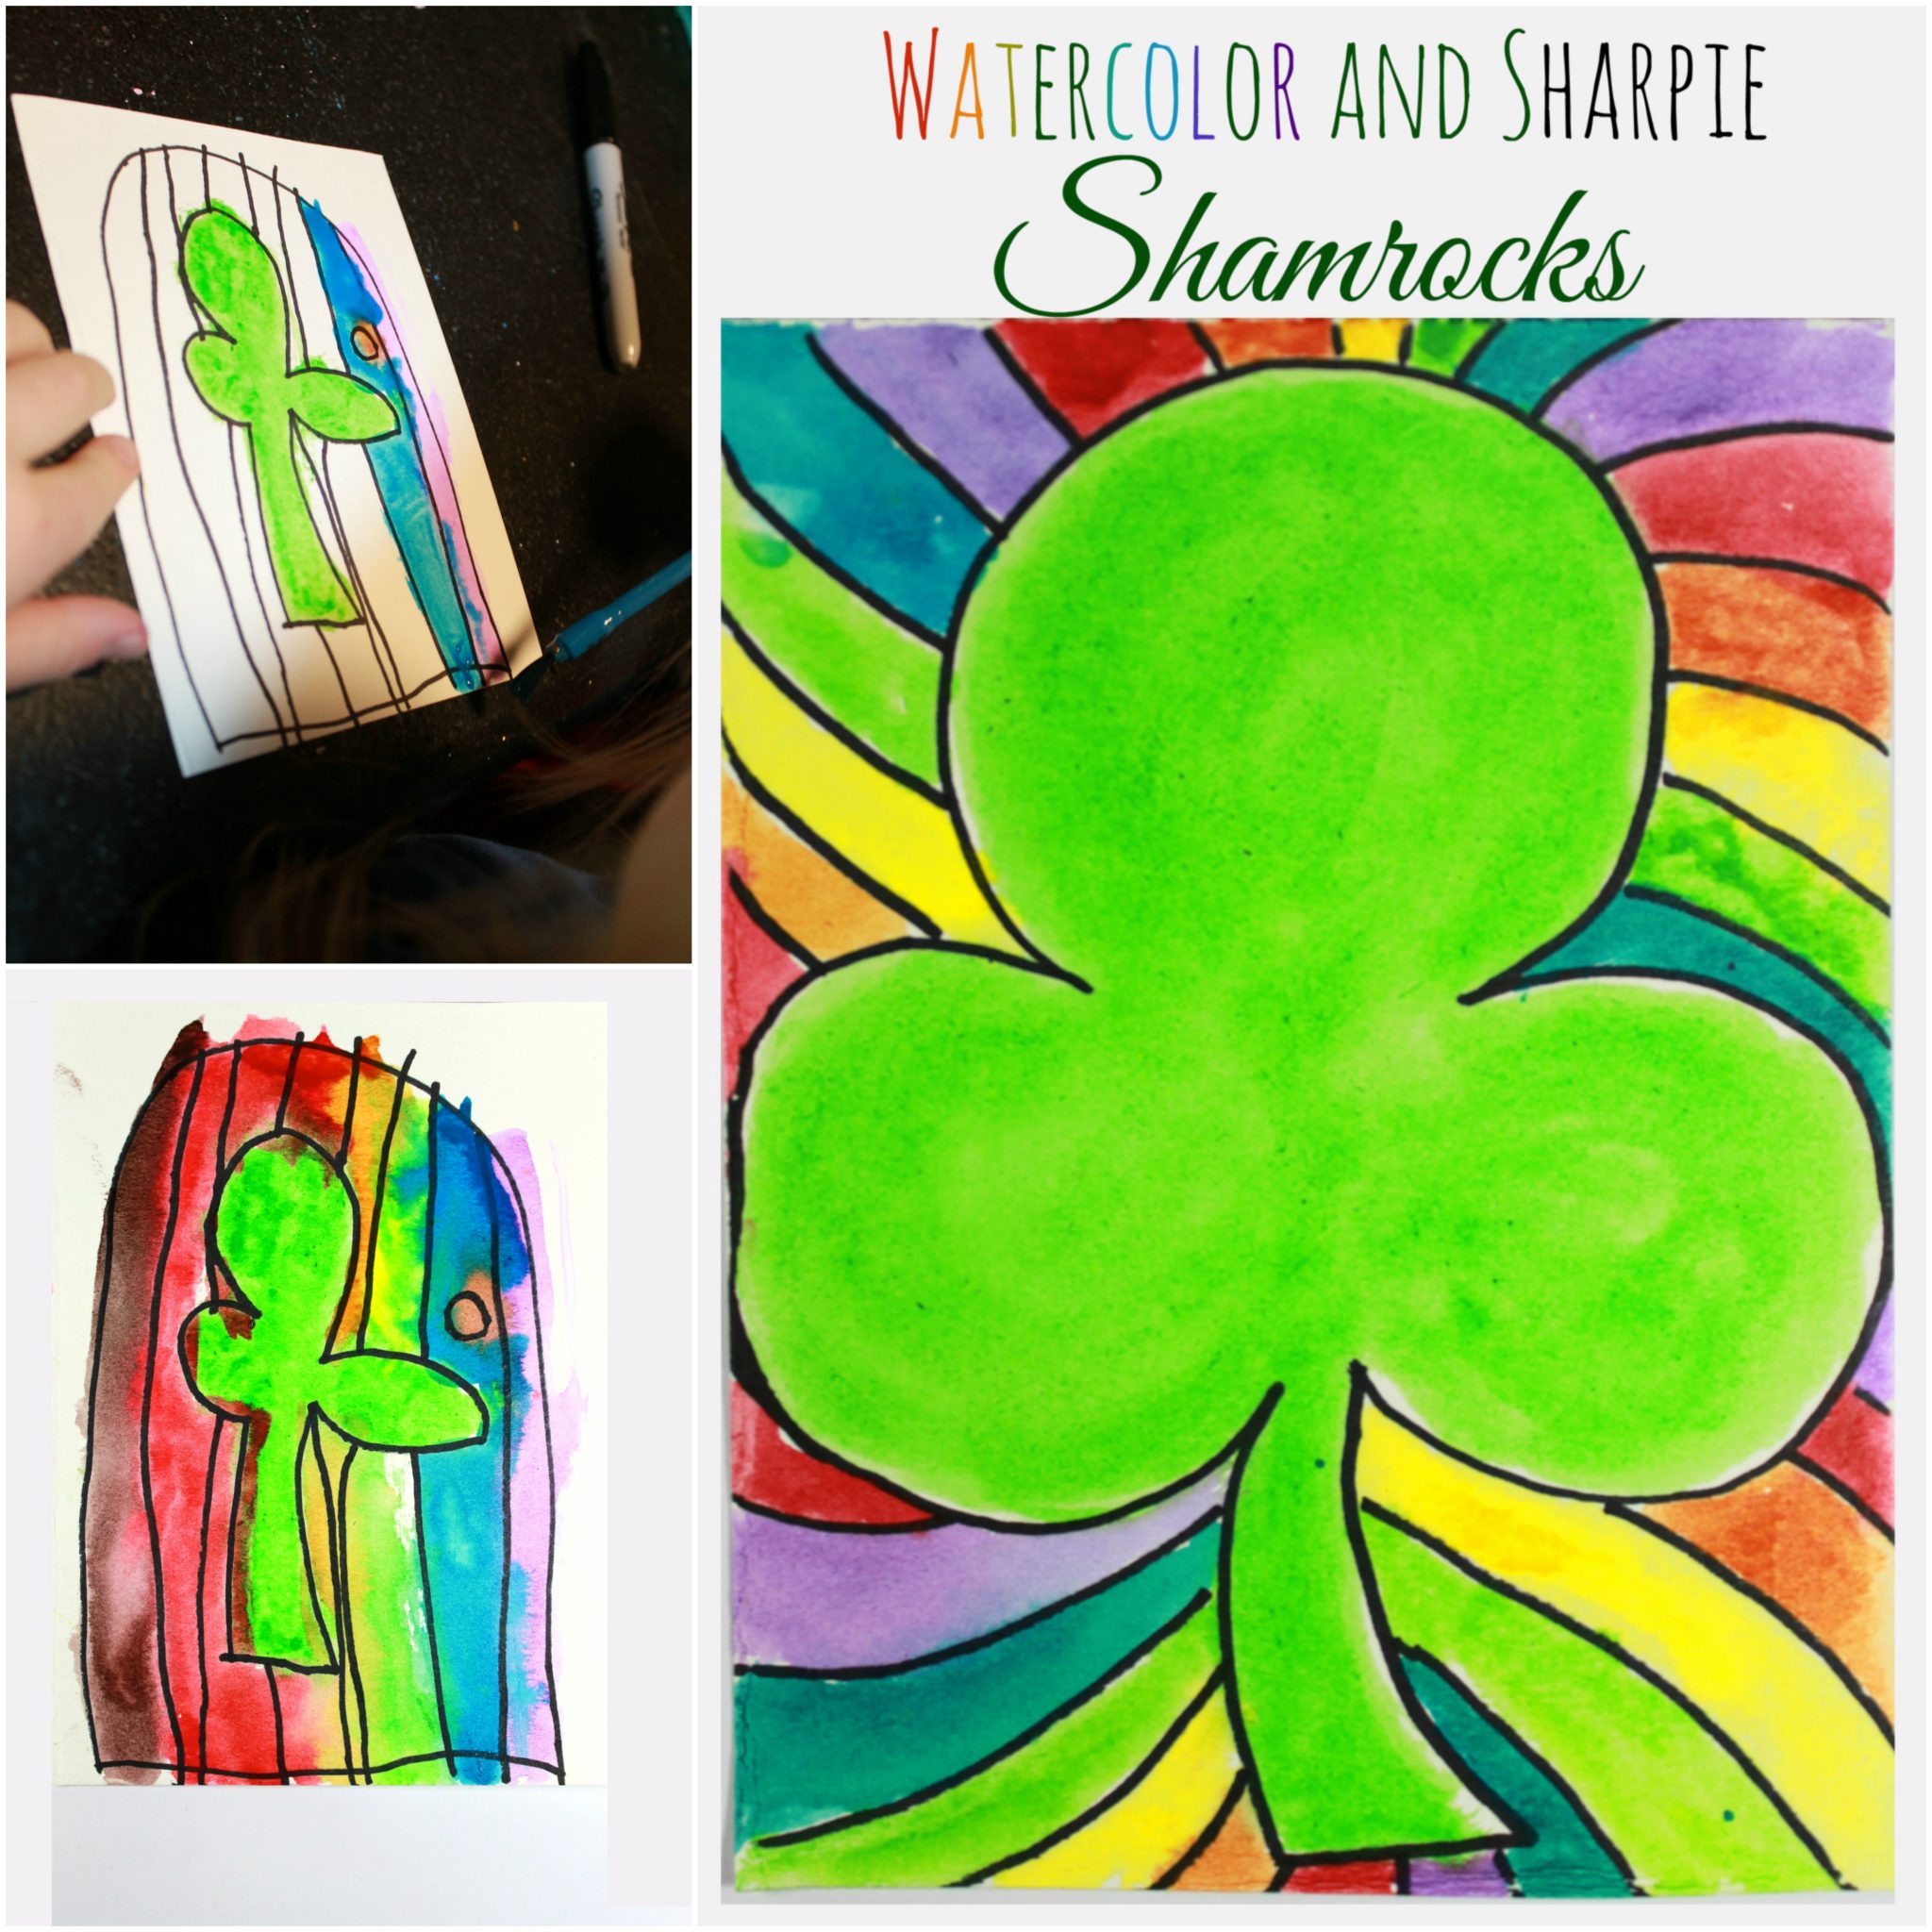 Watercolor and Sharpie shamrocks for St. Patrick's Day. Simple kid's arts & crafts, painting projects. Great for preschoolers too.